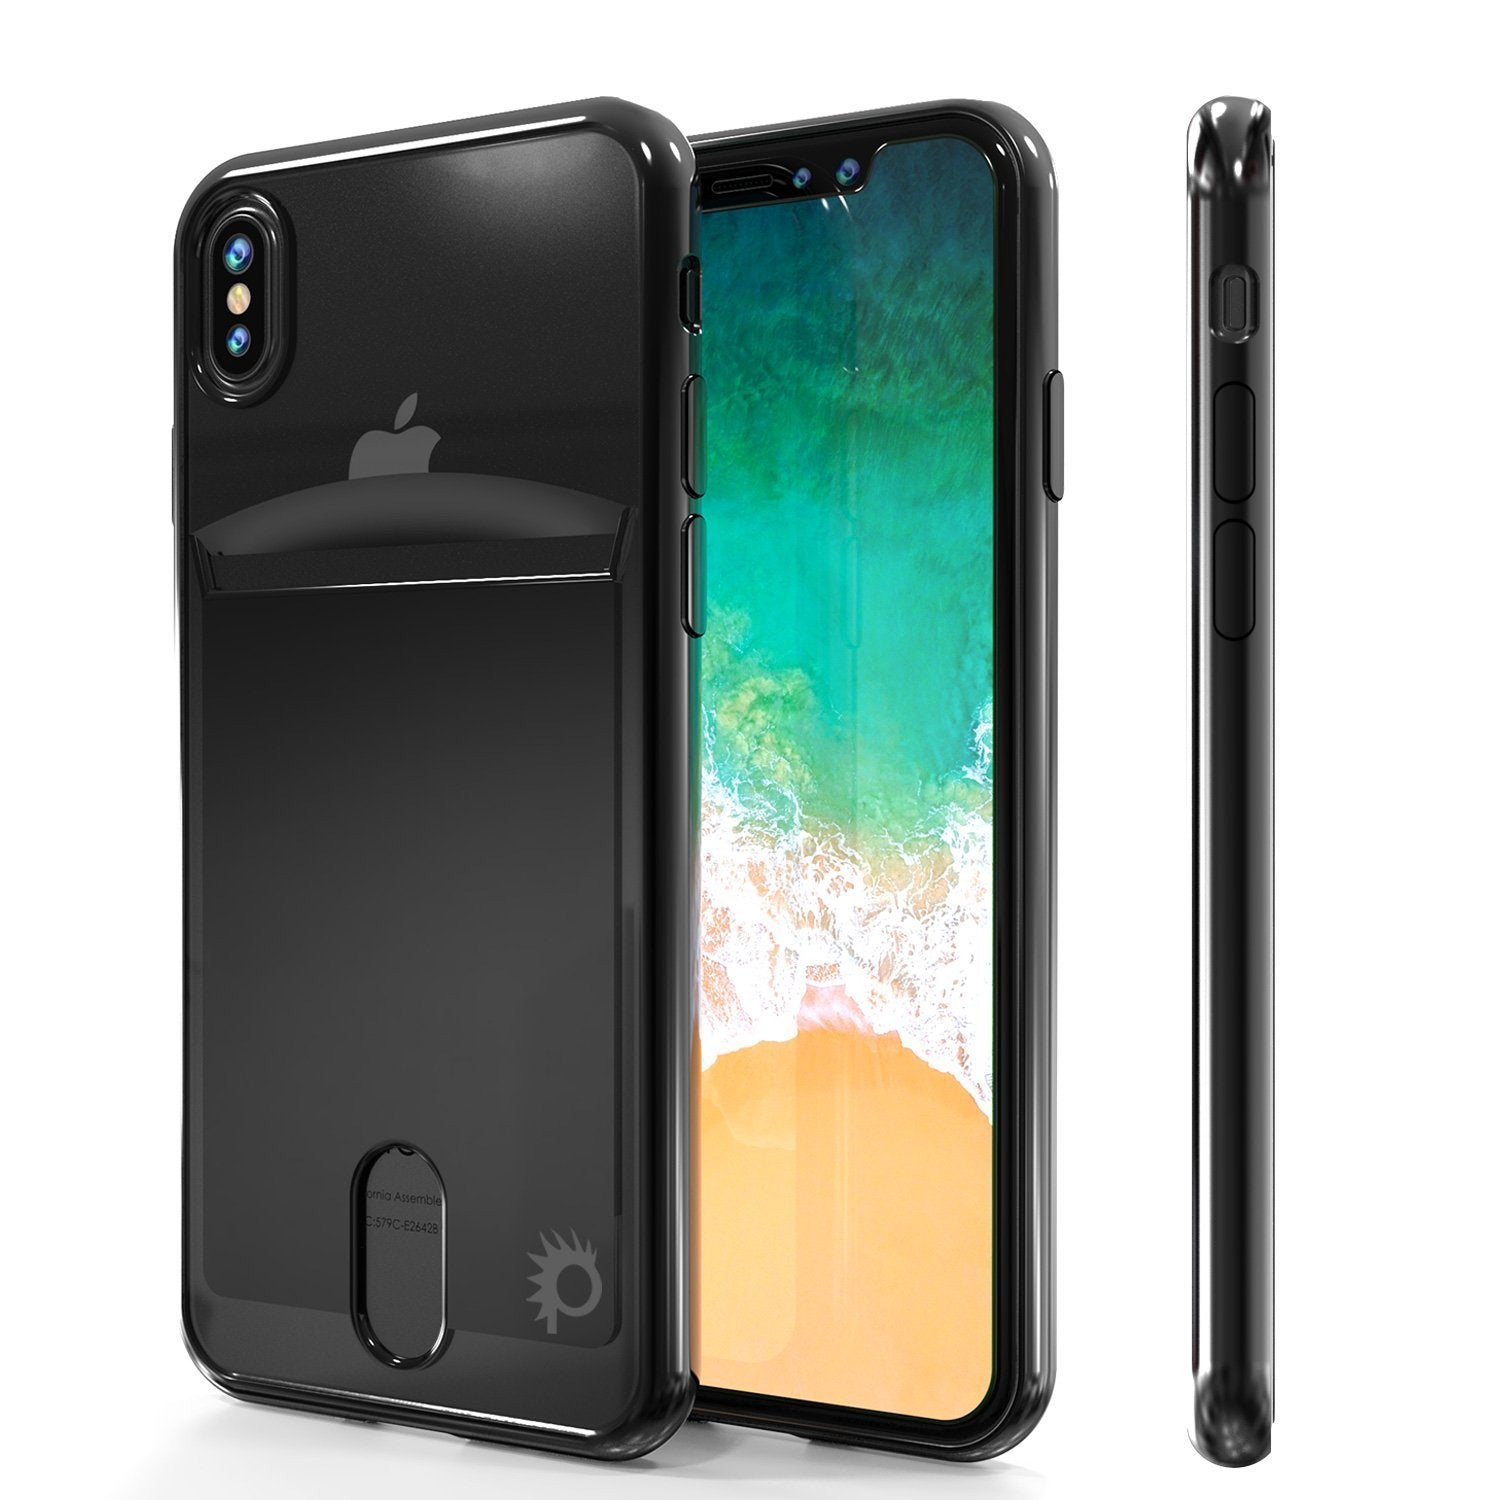 iPhone X Case, PUNKcase [LUCID Series] Slim Fit Protective Dual Layer Armor Cover [Black]